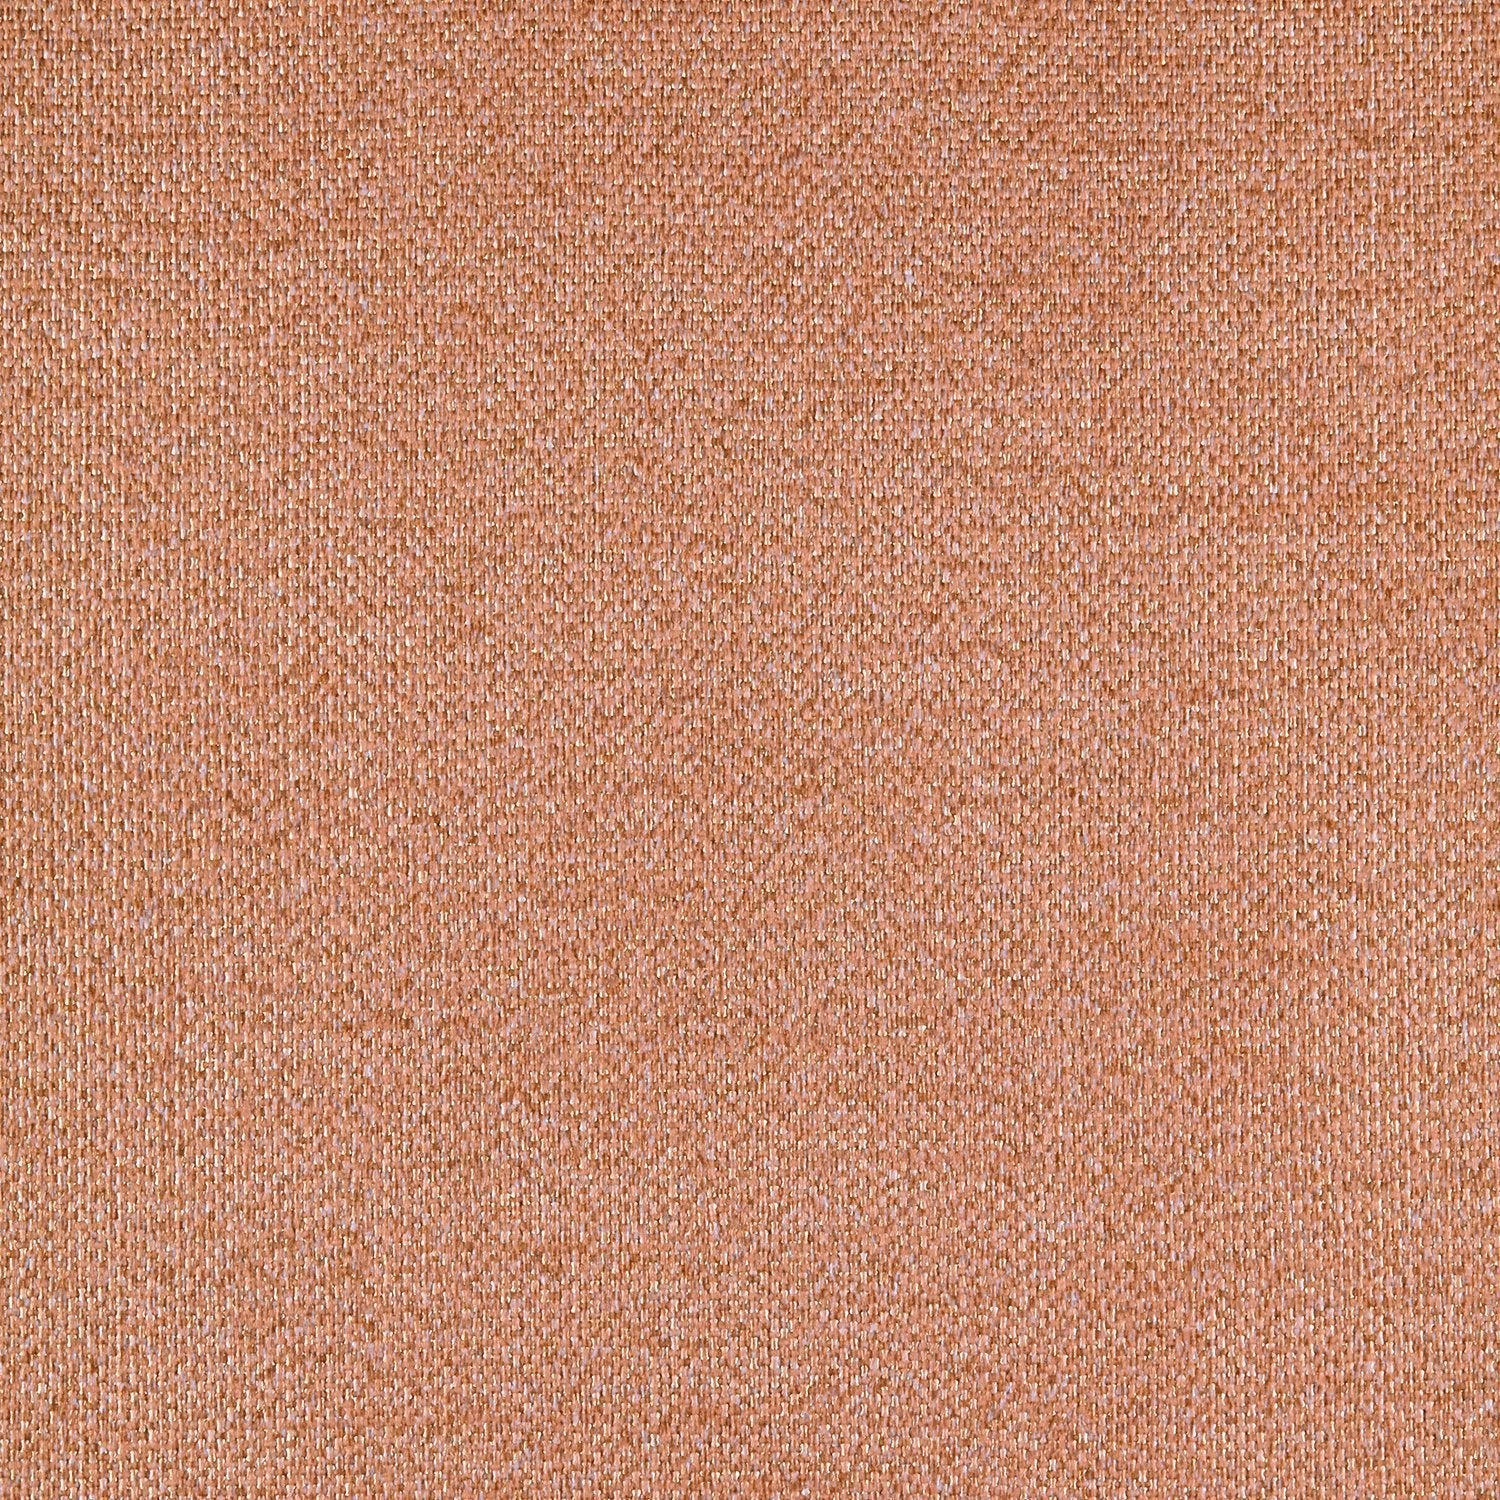 Tweed - Y46931 - Wallcovering - Vycon - Kube Contract